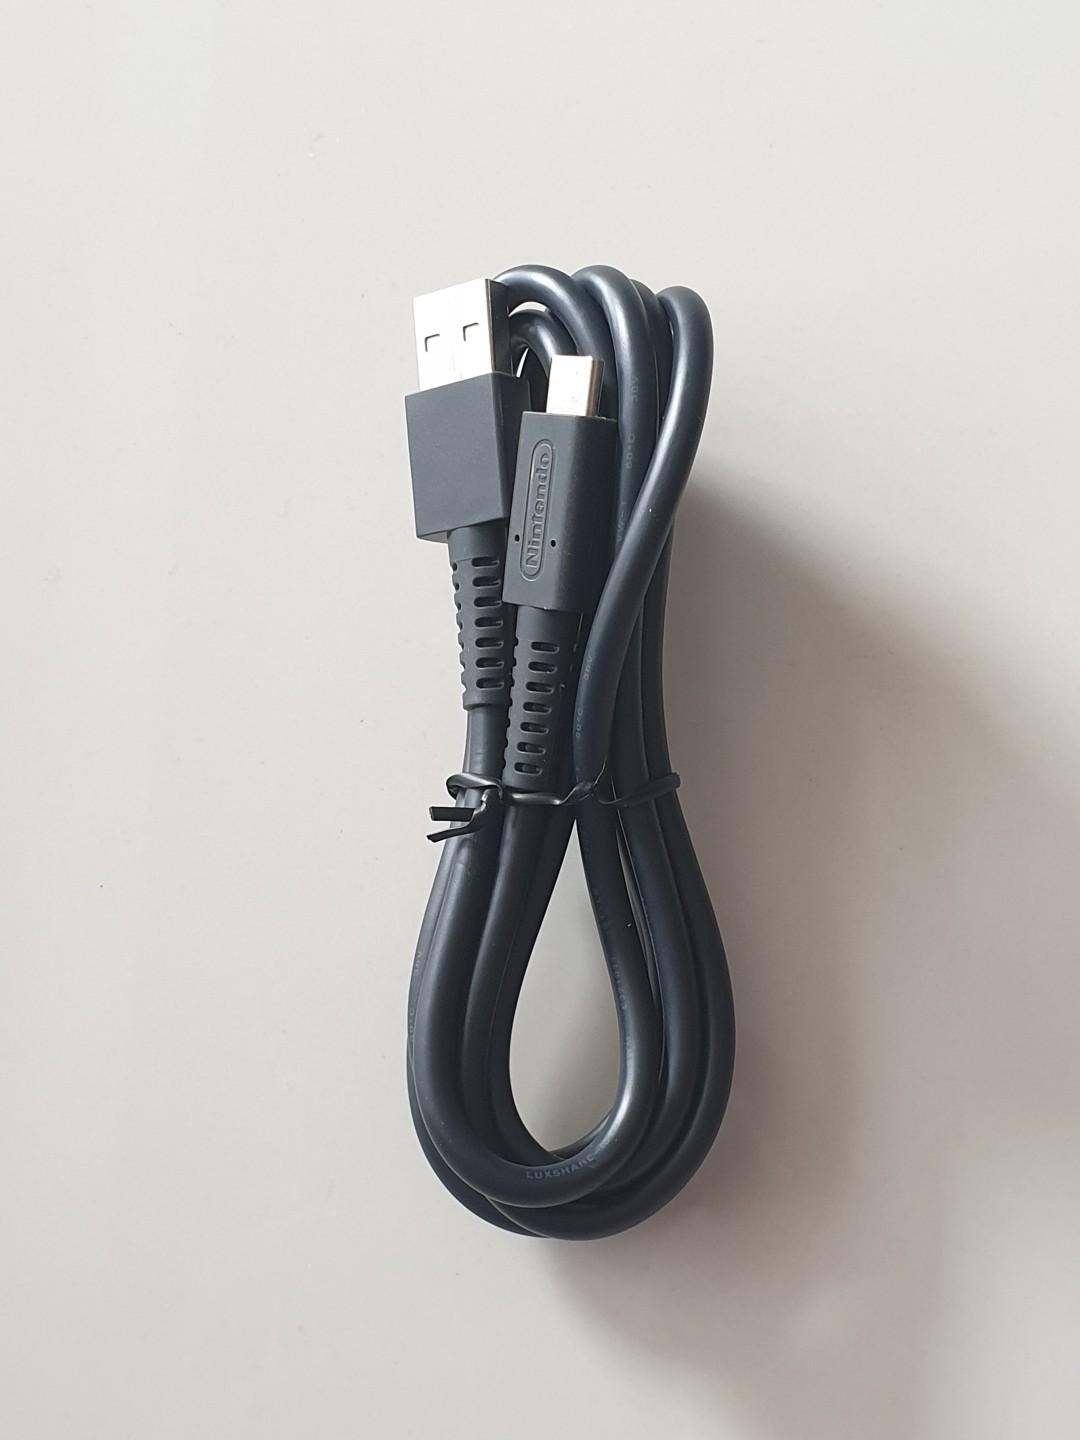 nintendo switch usb c charger